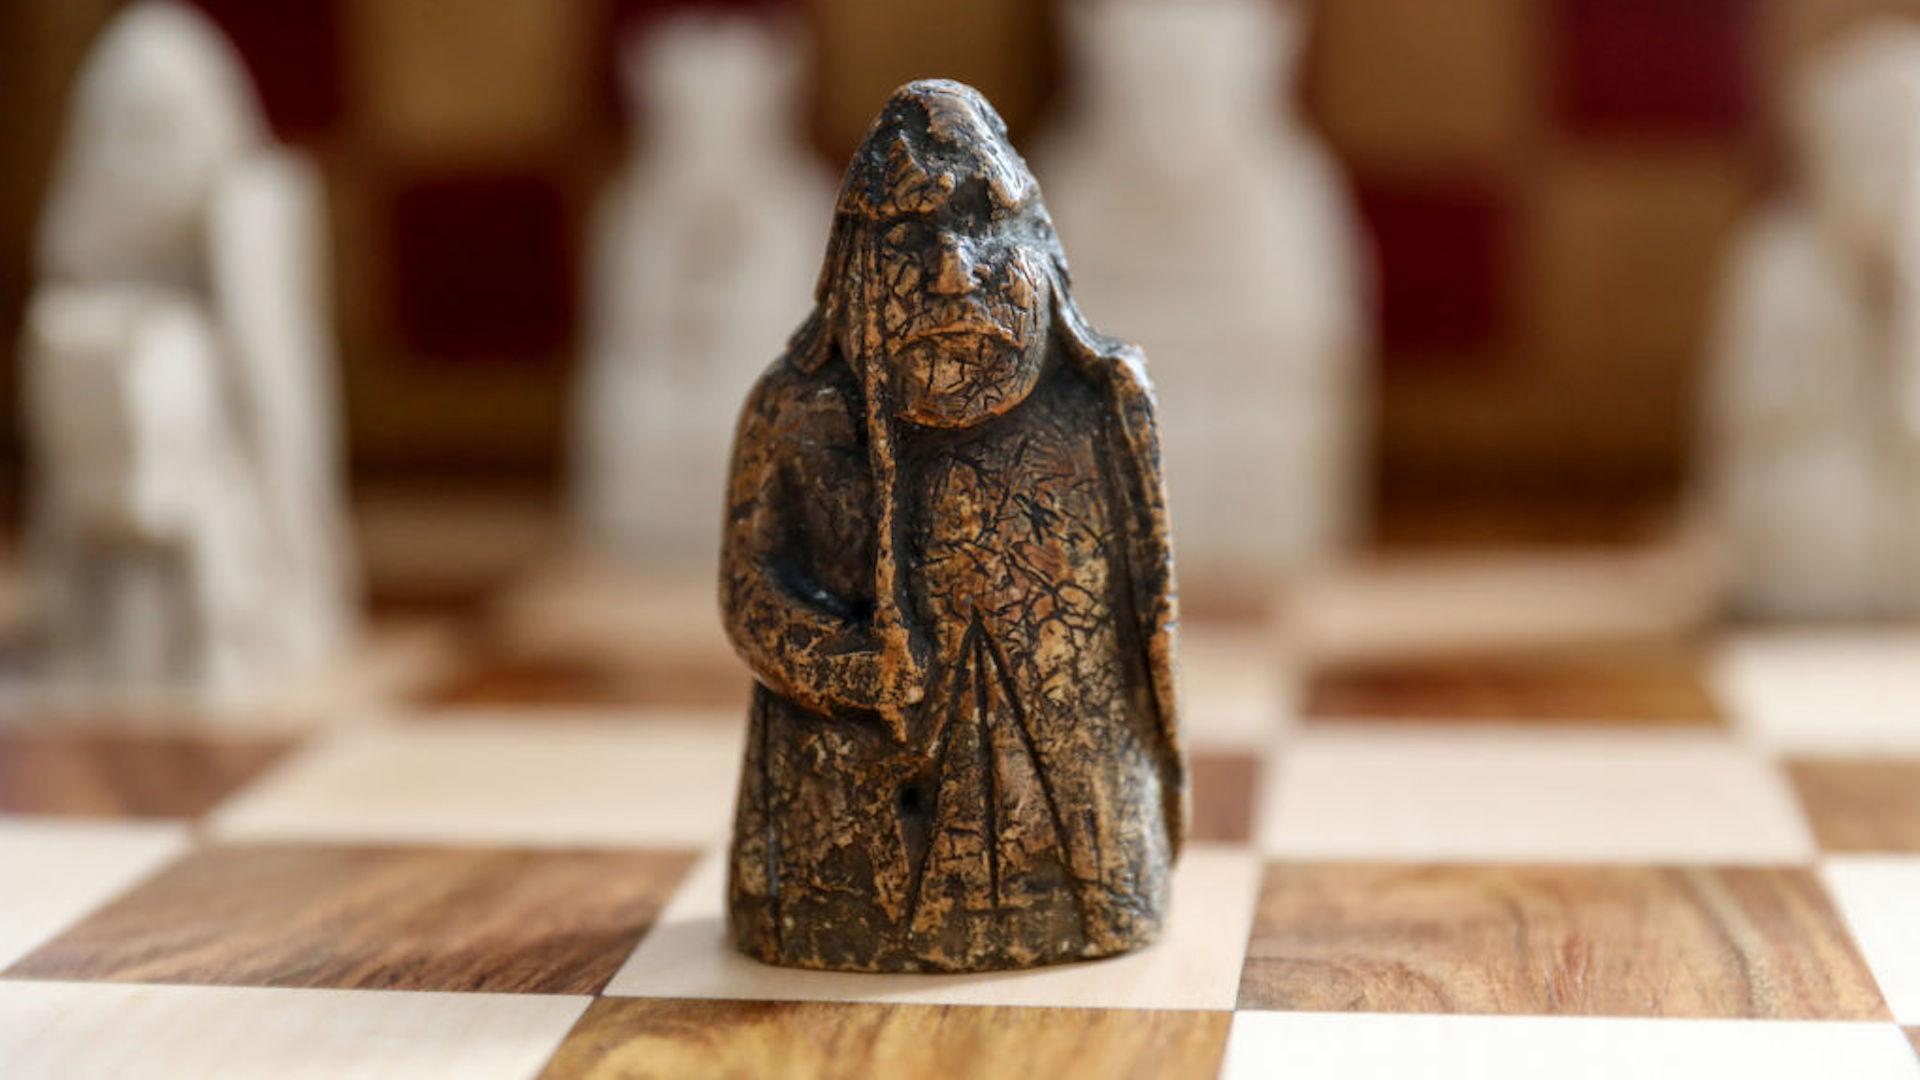 How Did the Chess Pieces Get Their Names? - Atlas Obscura